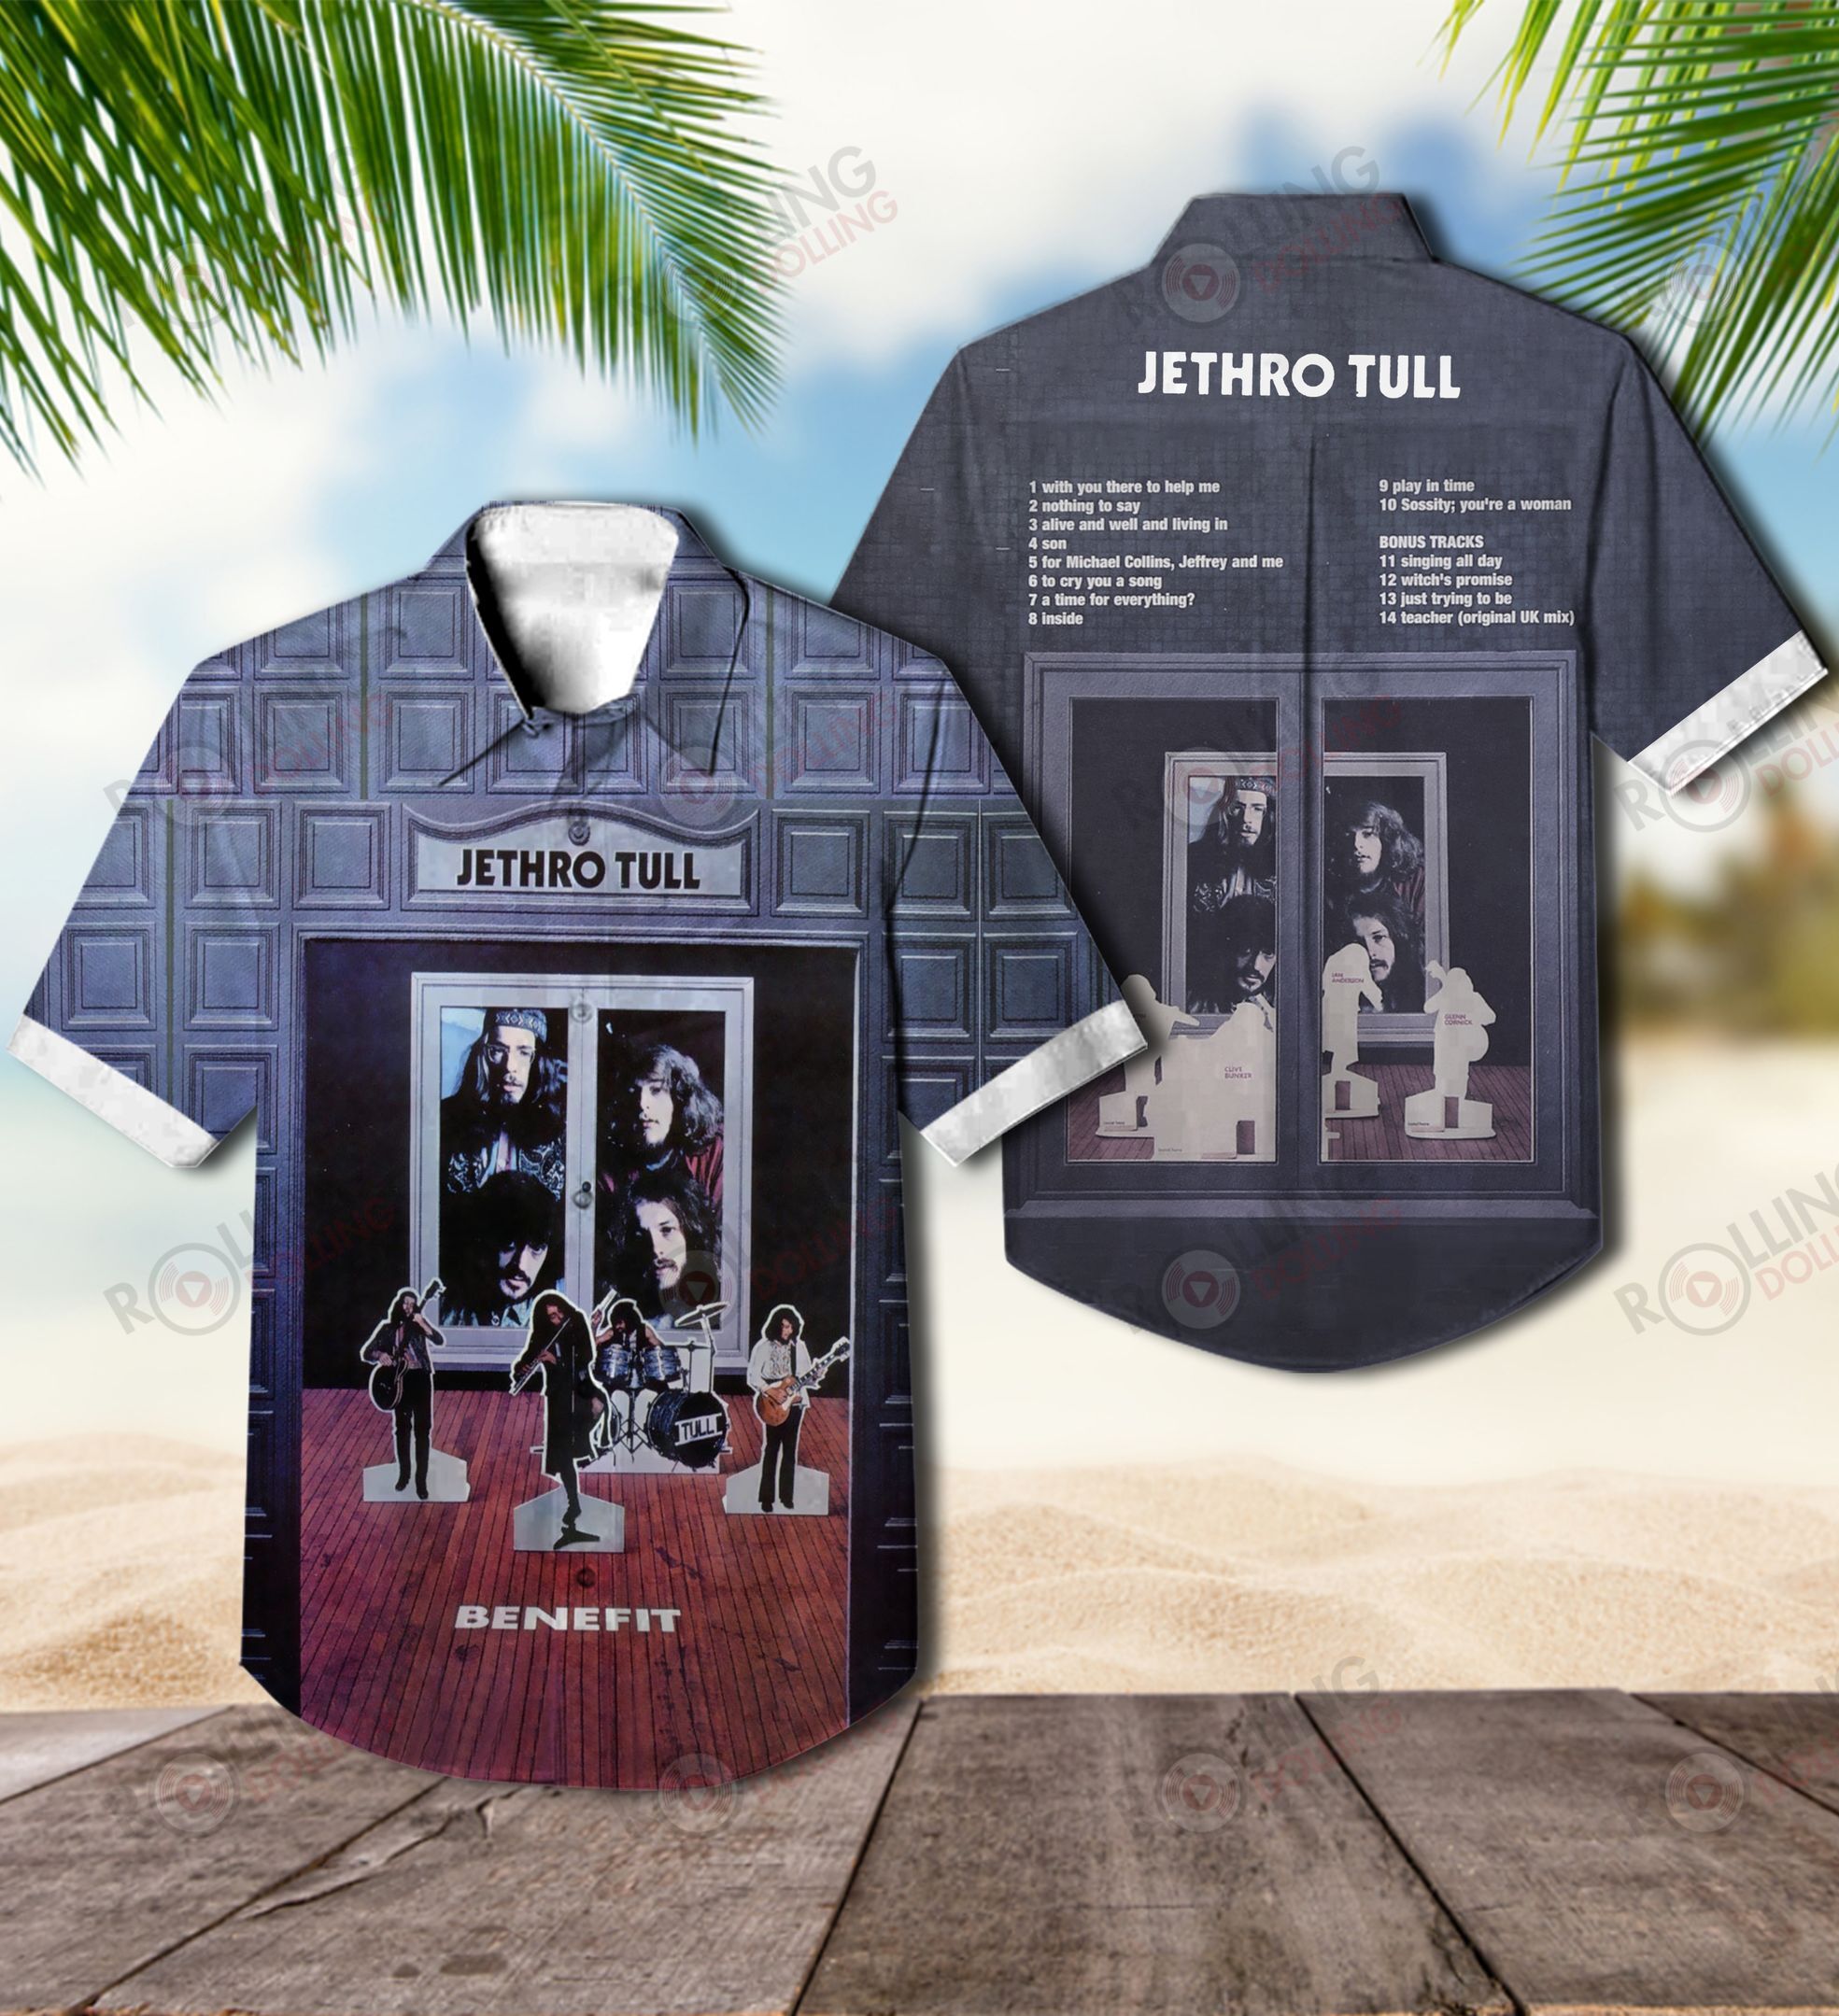 The Hawaiian Shirt is a popular shirt that is worn by Rock band fans 84